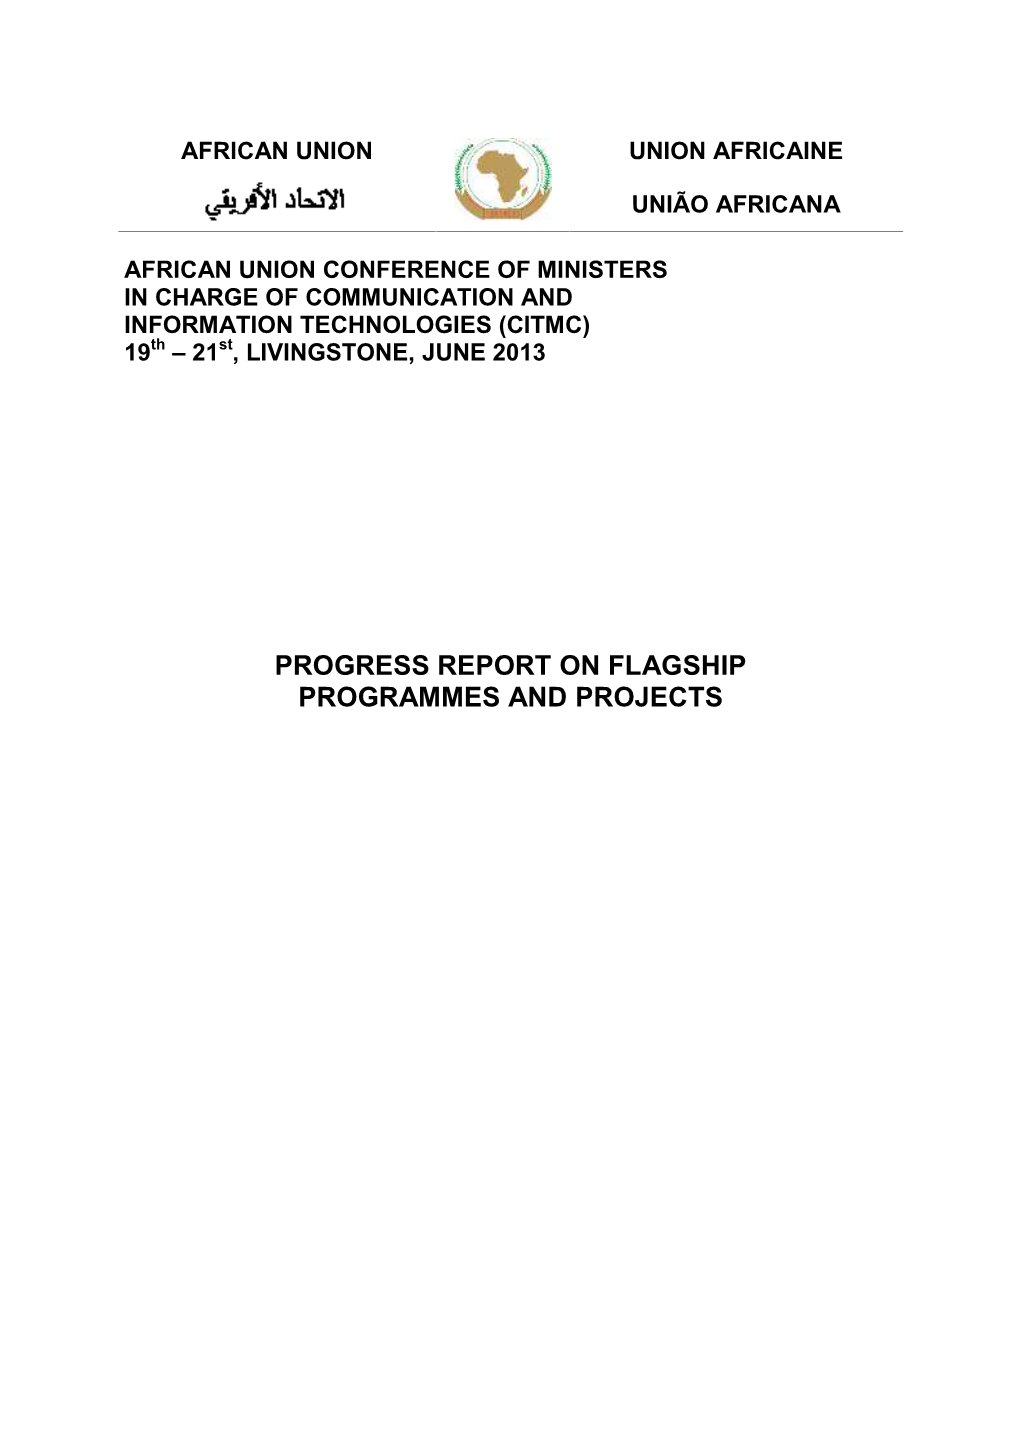 Progress Report on Flagship Programmes and Projects I